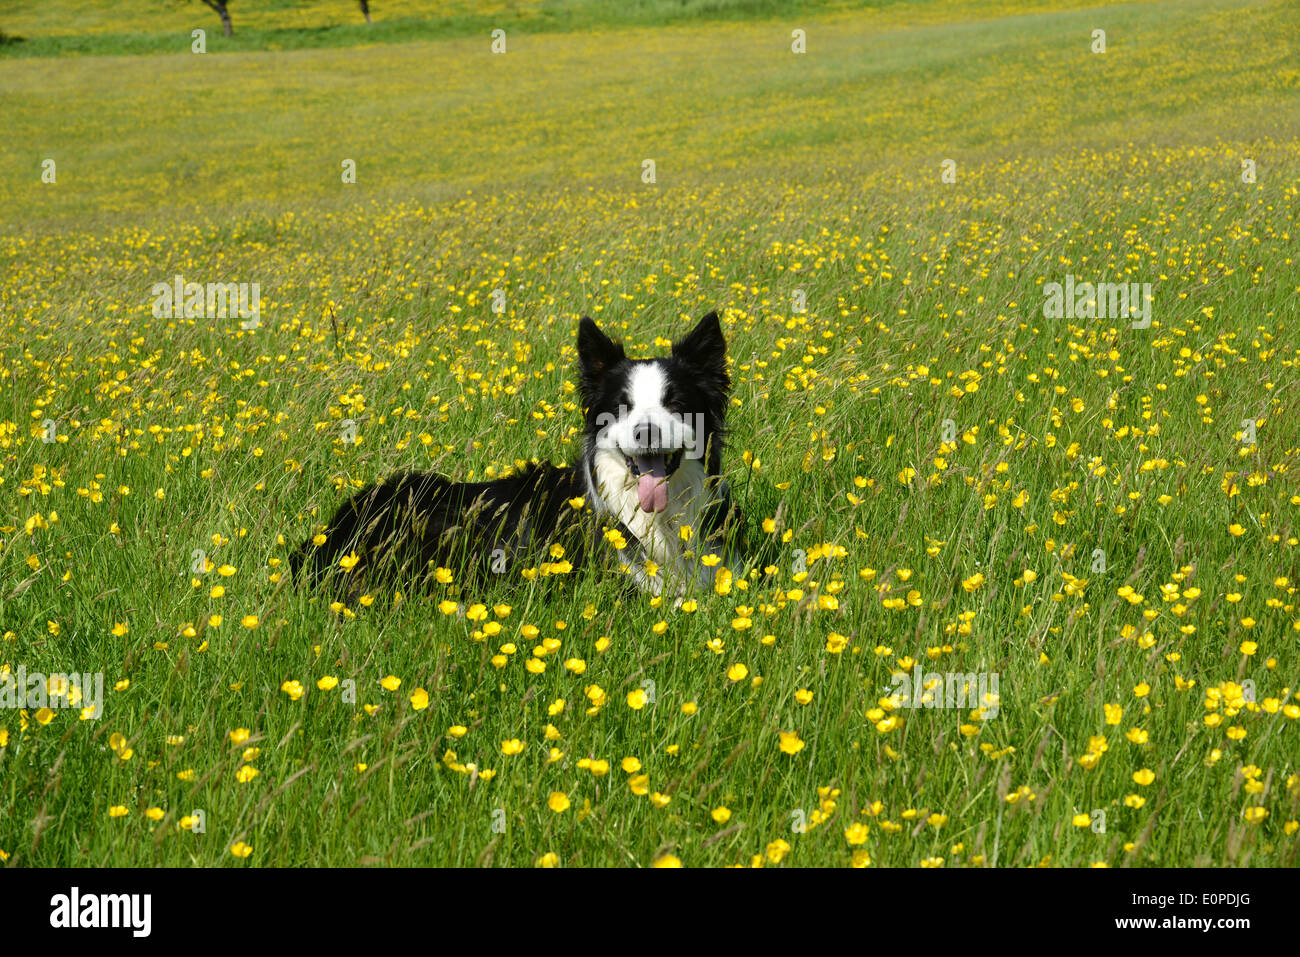 Buttercup meadow with border collie dog in Buttercups Uk Stock Photo